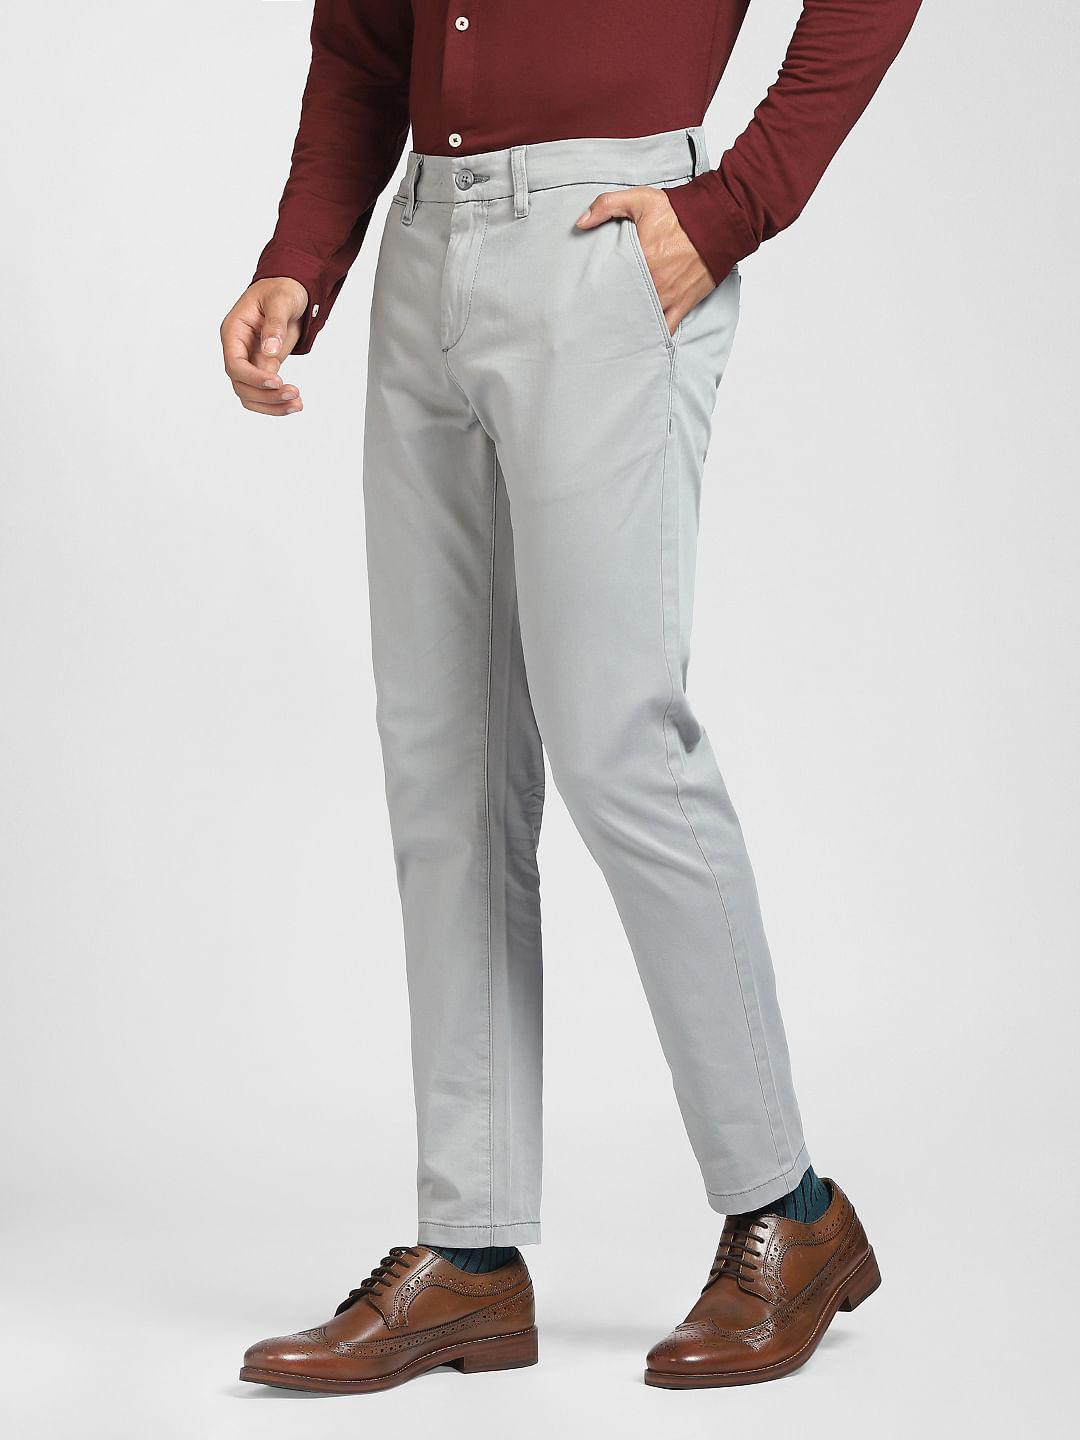 Buy Louis Philippe Grey Trousers Online  771968  Louis Philippe